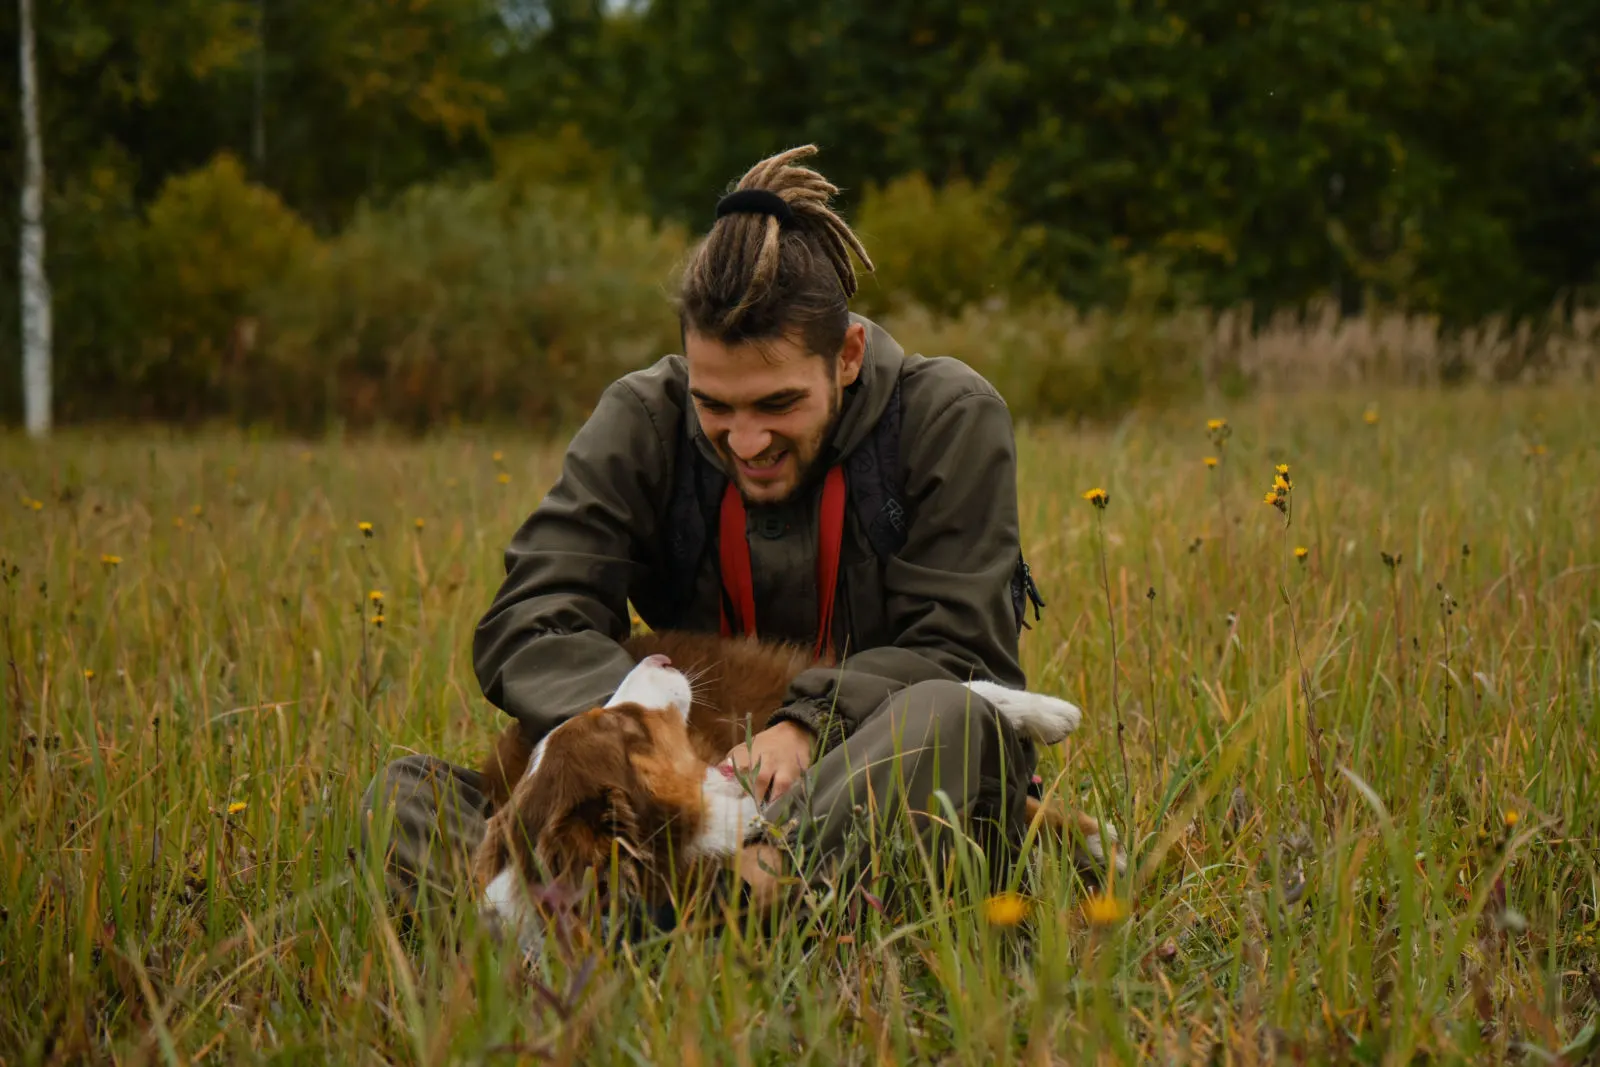 Young Caucasian man with dreadlocks and beard plays with Australian shepherd in autumn field.